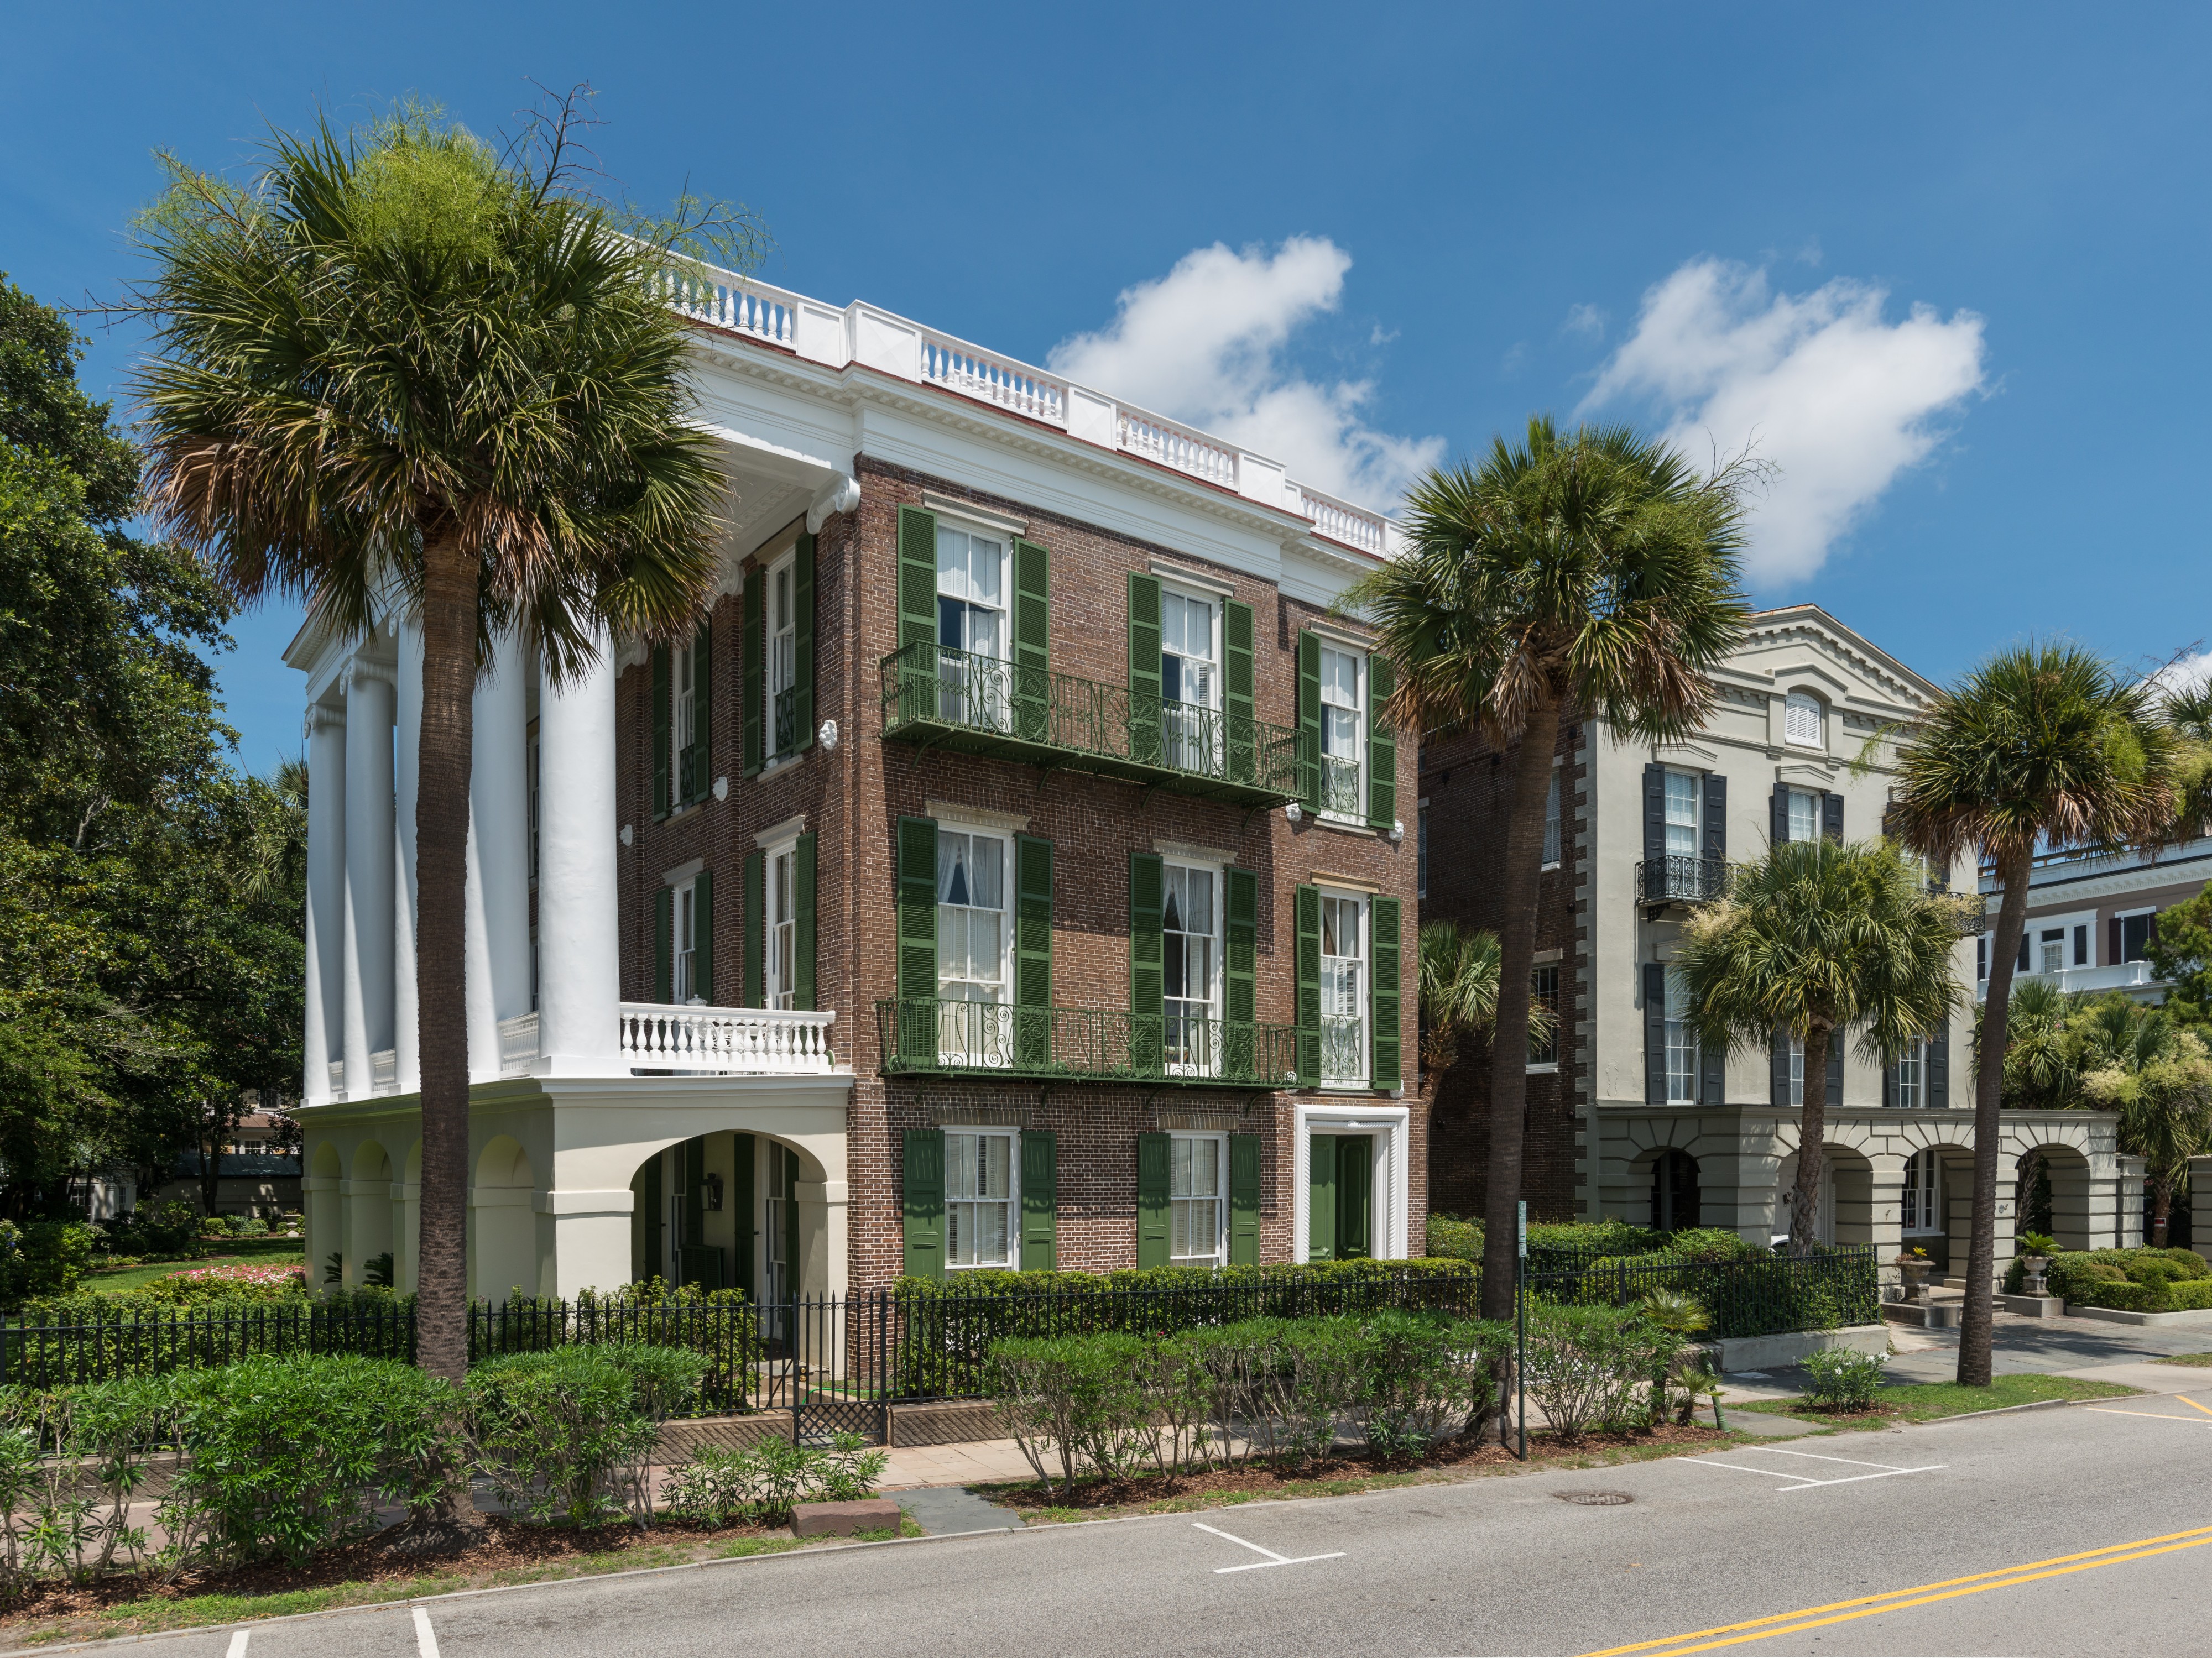 9 and 15 East Battery, Charleston SC 20160704 1